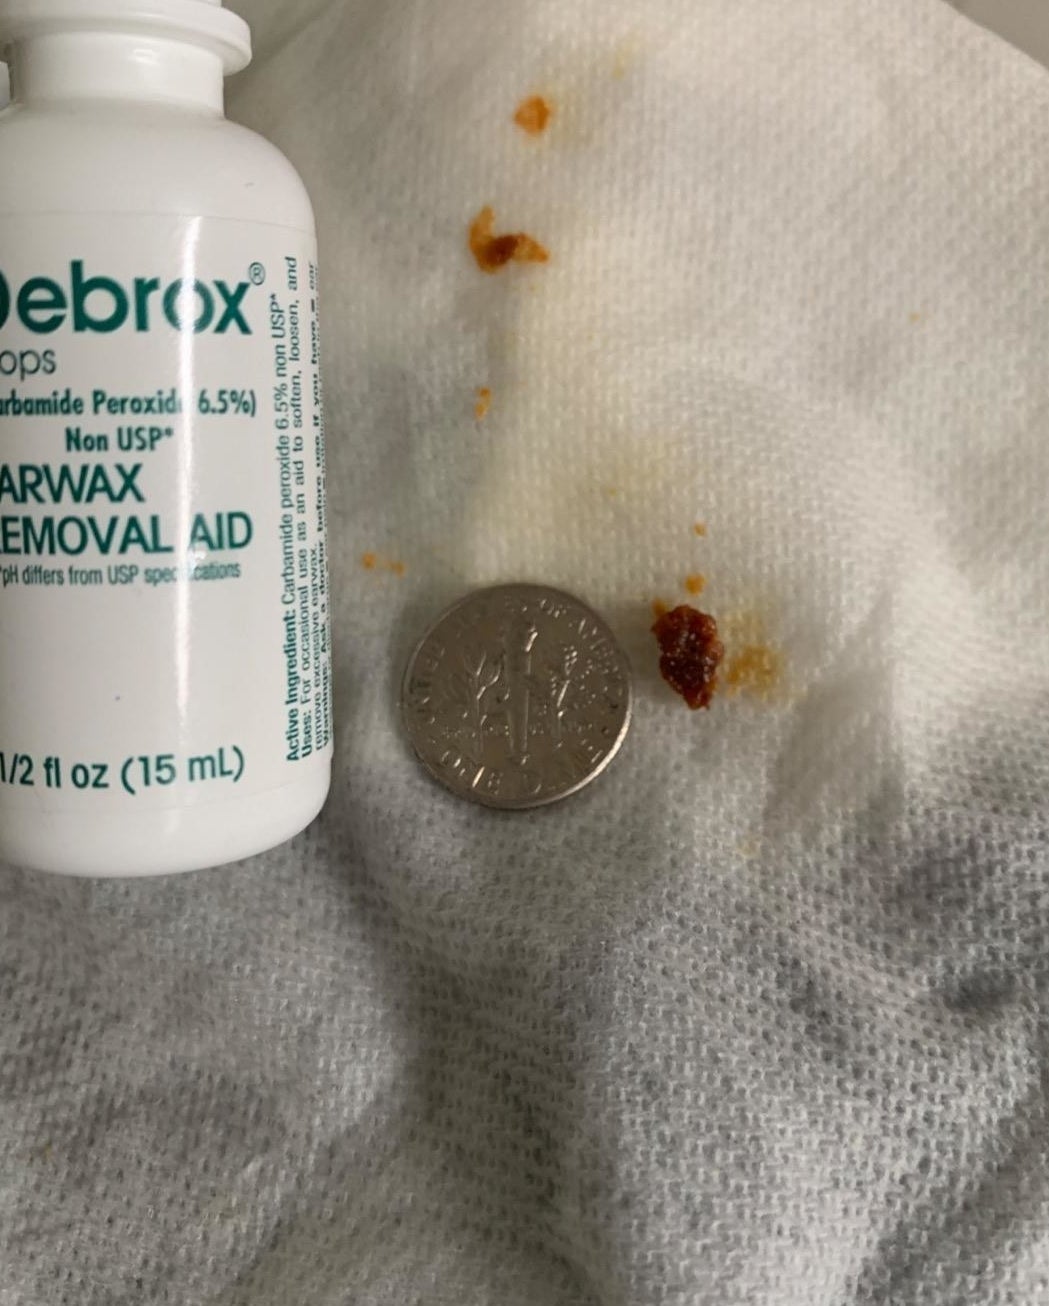 A tissue with clumps of earwax next to a dime for size as well as the container of drops